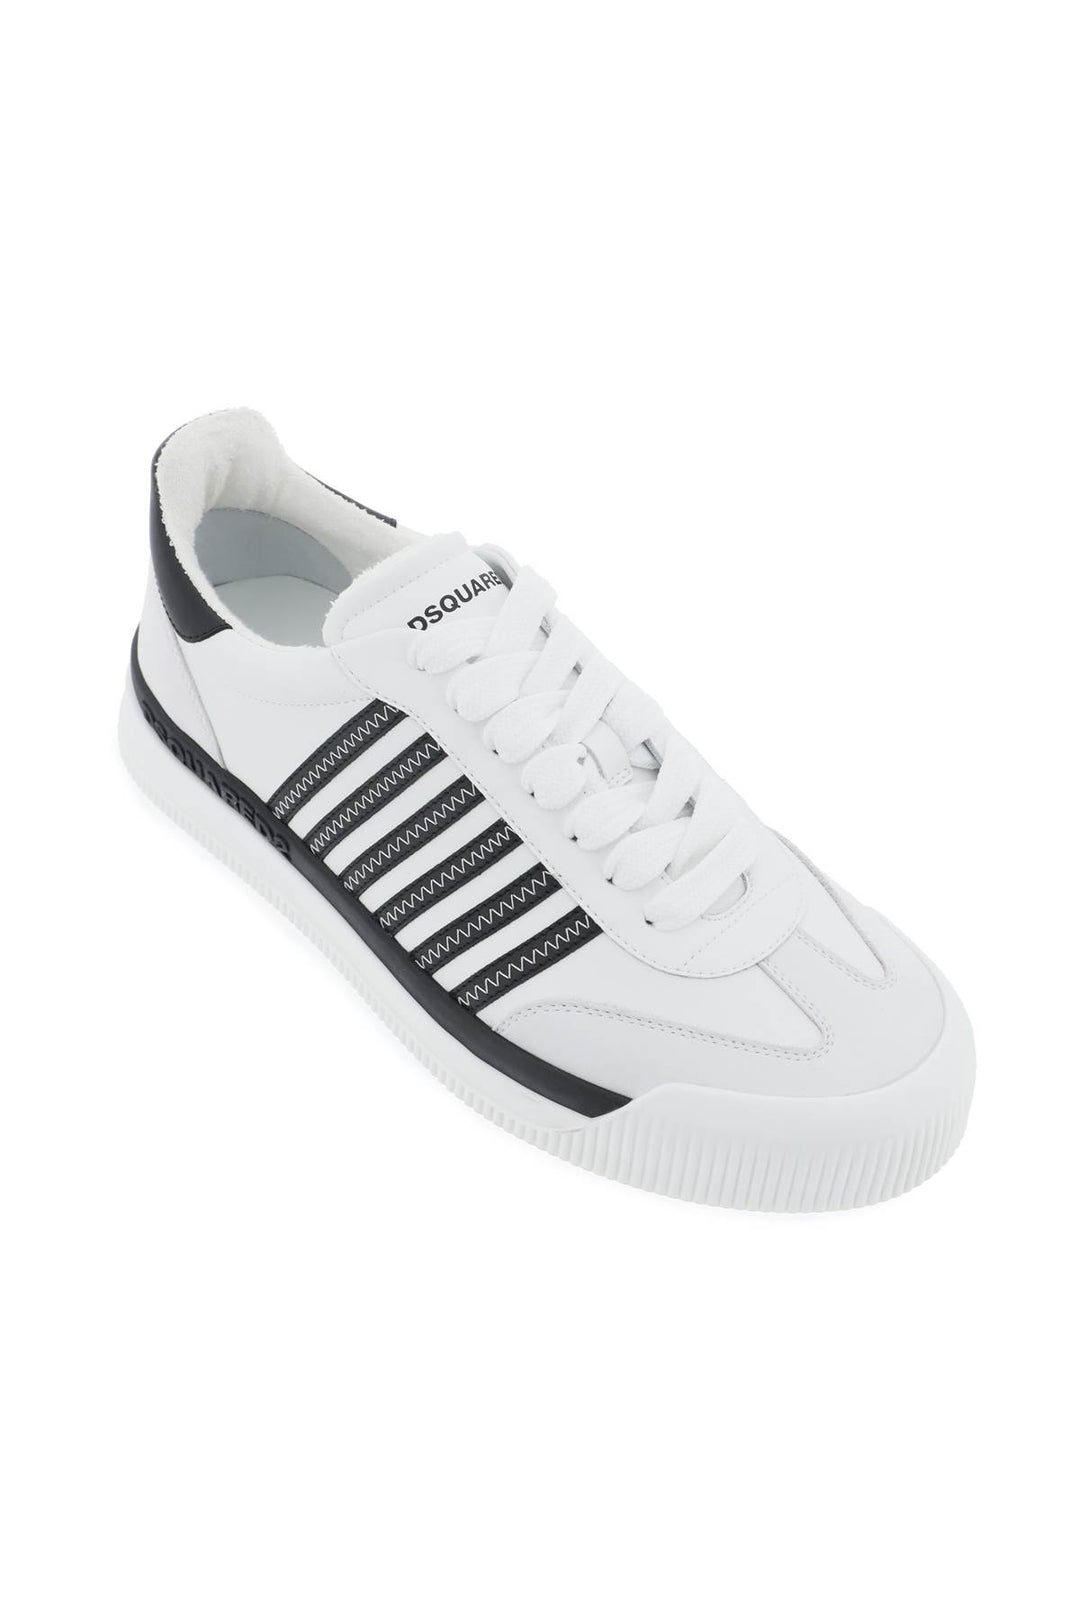 Sneakers New Jersey - Dsquared2 - Uomo